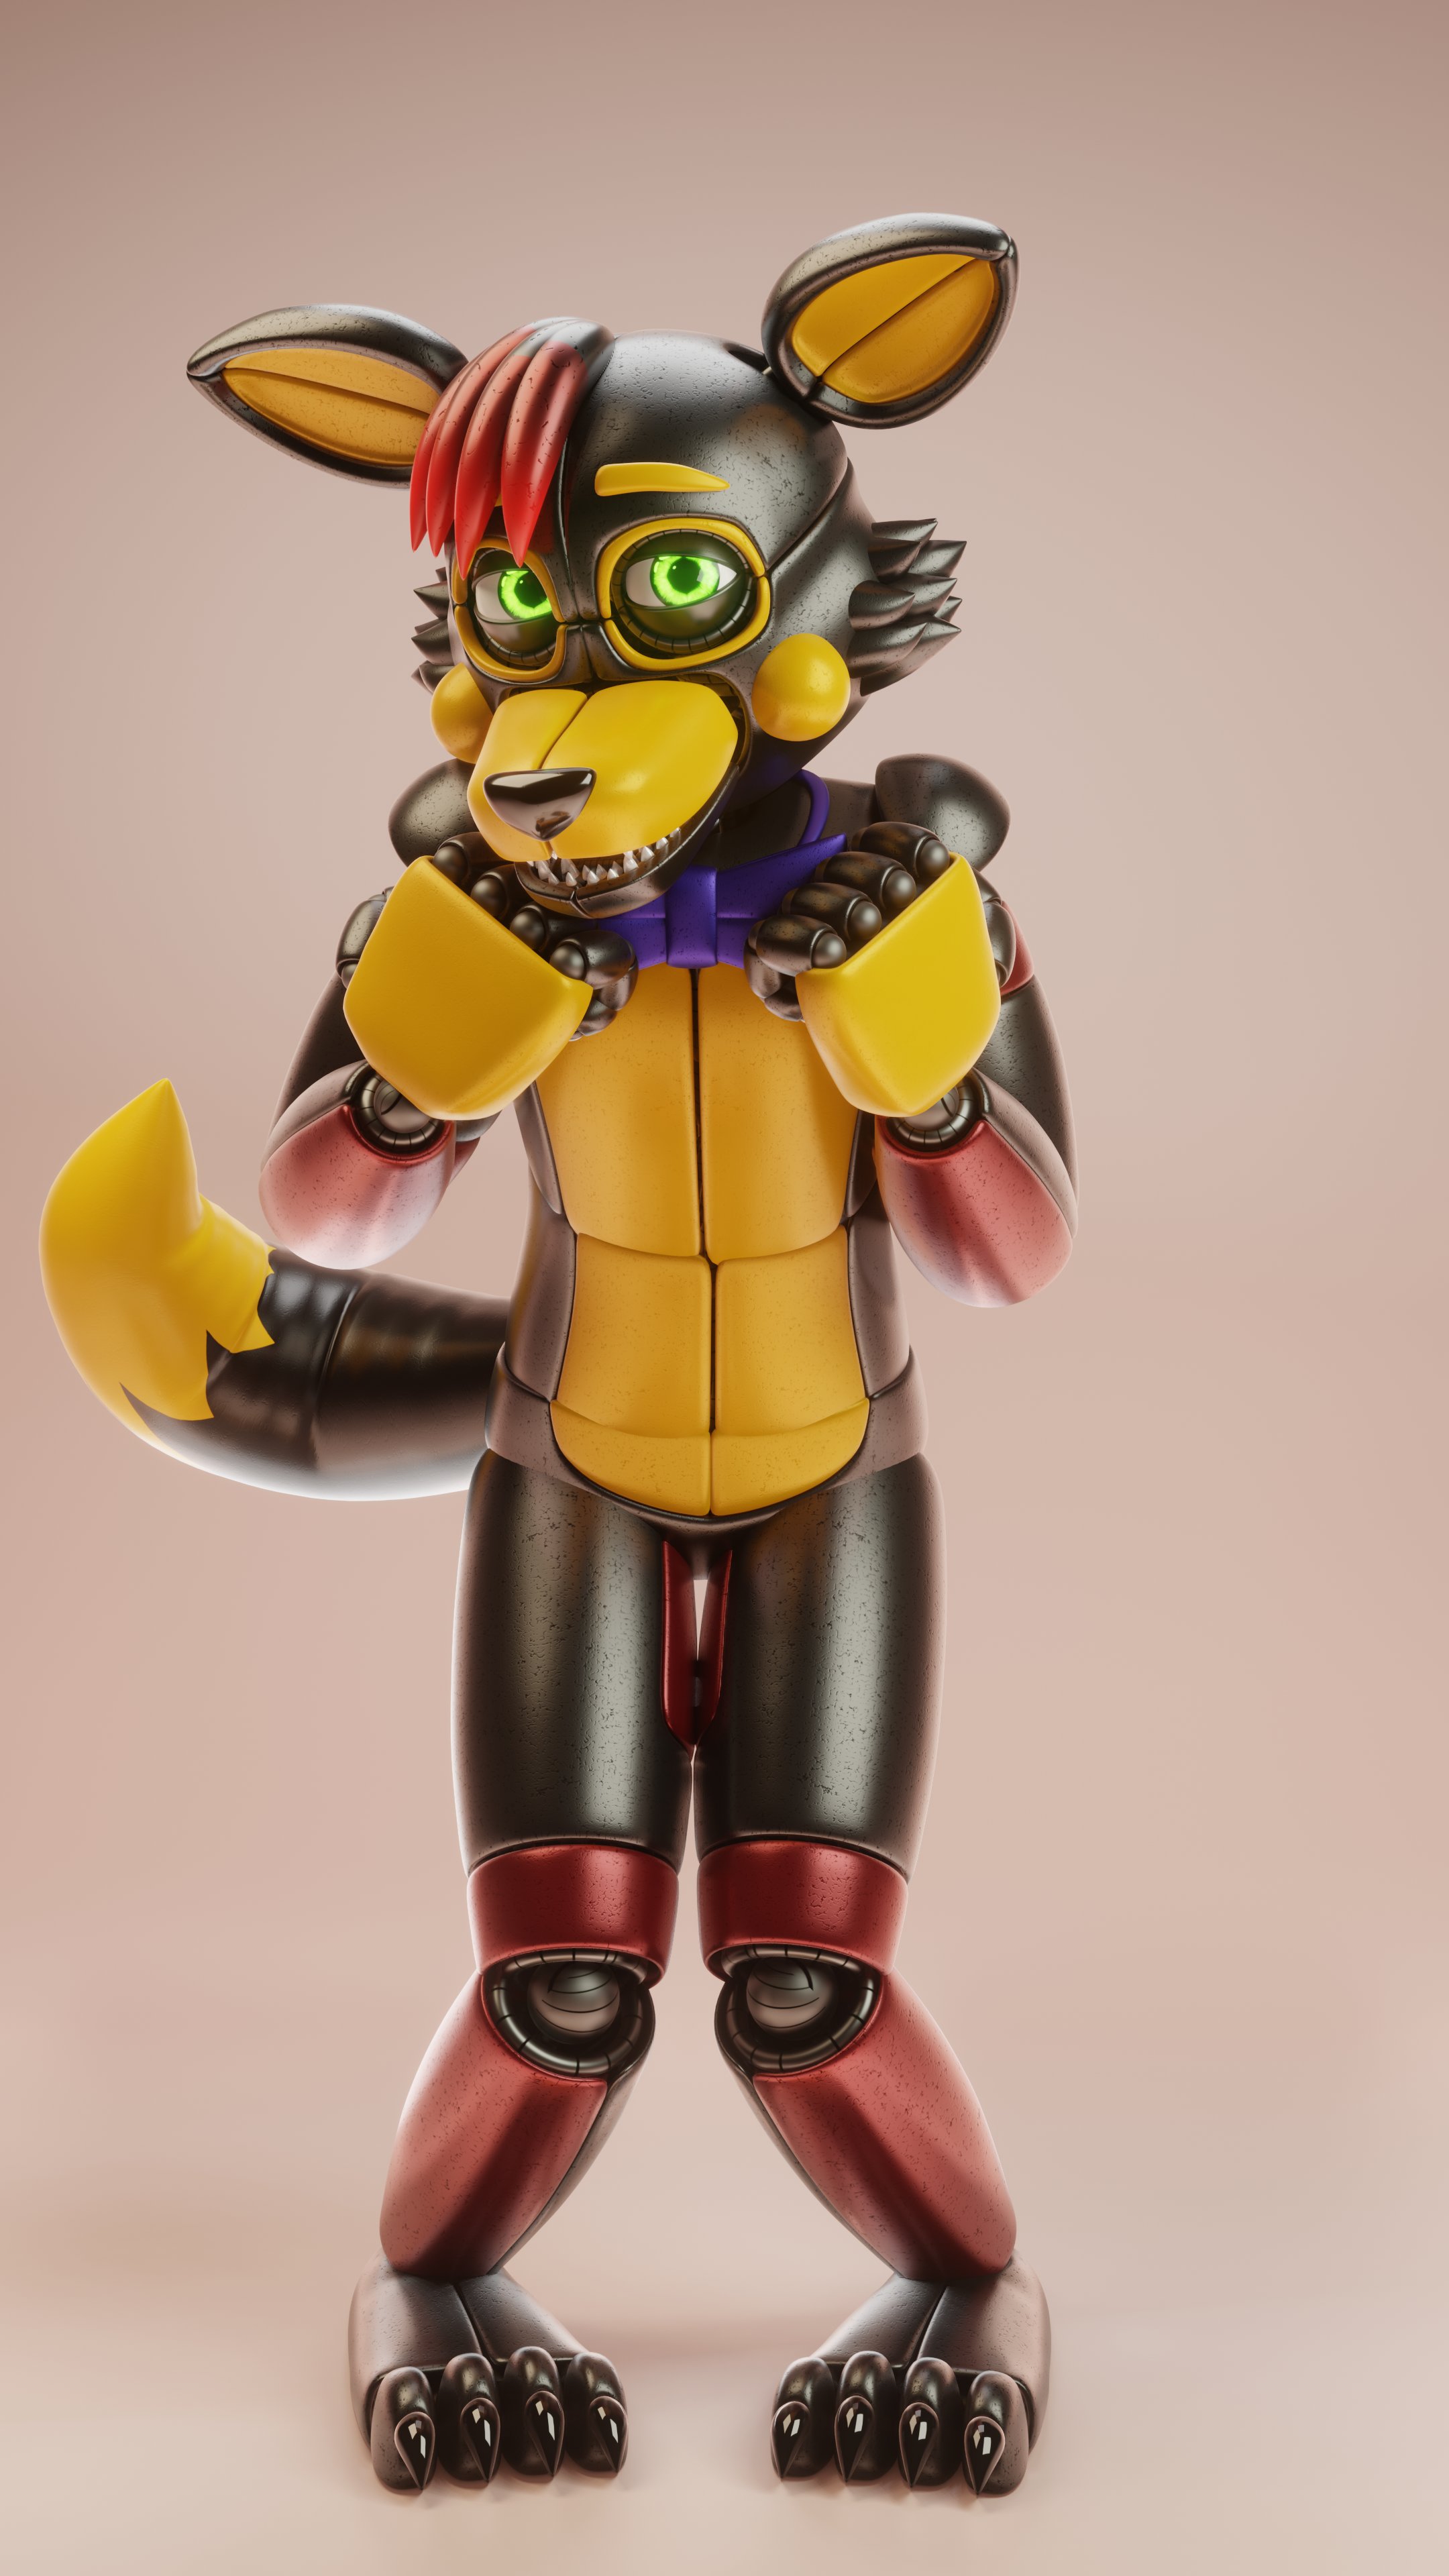 ToastyTheFox on X: I just made a Roxy poster in blender! I wanna